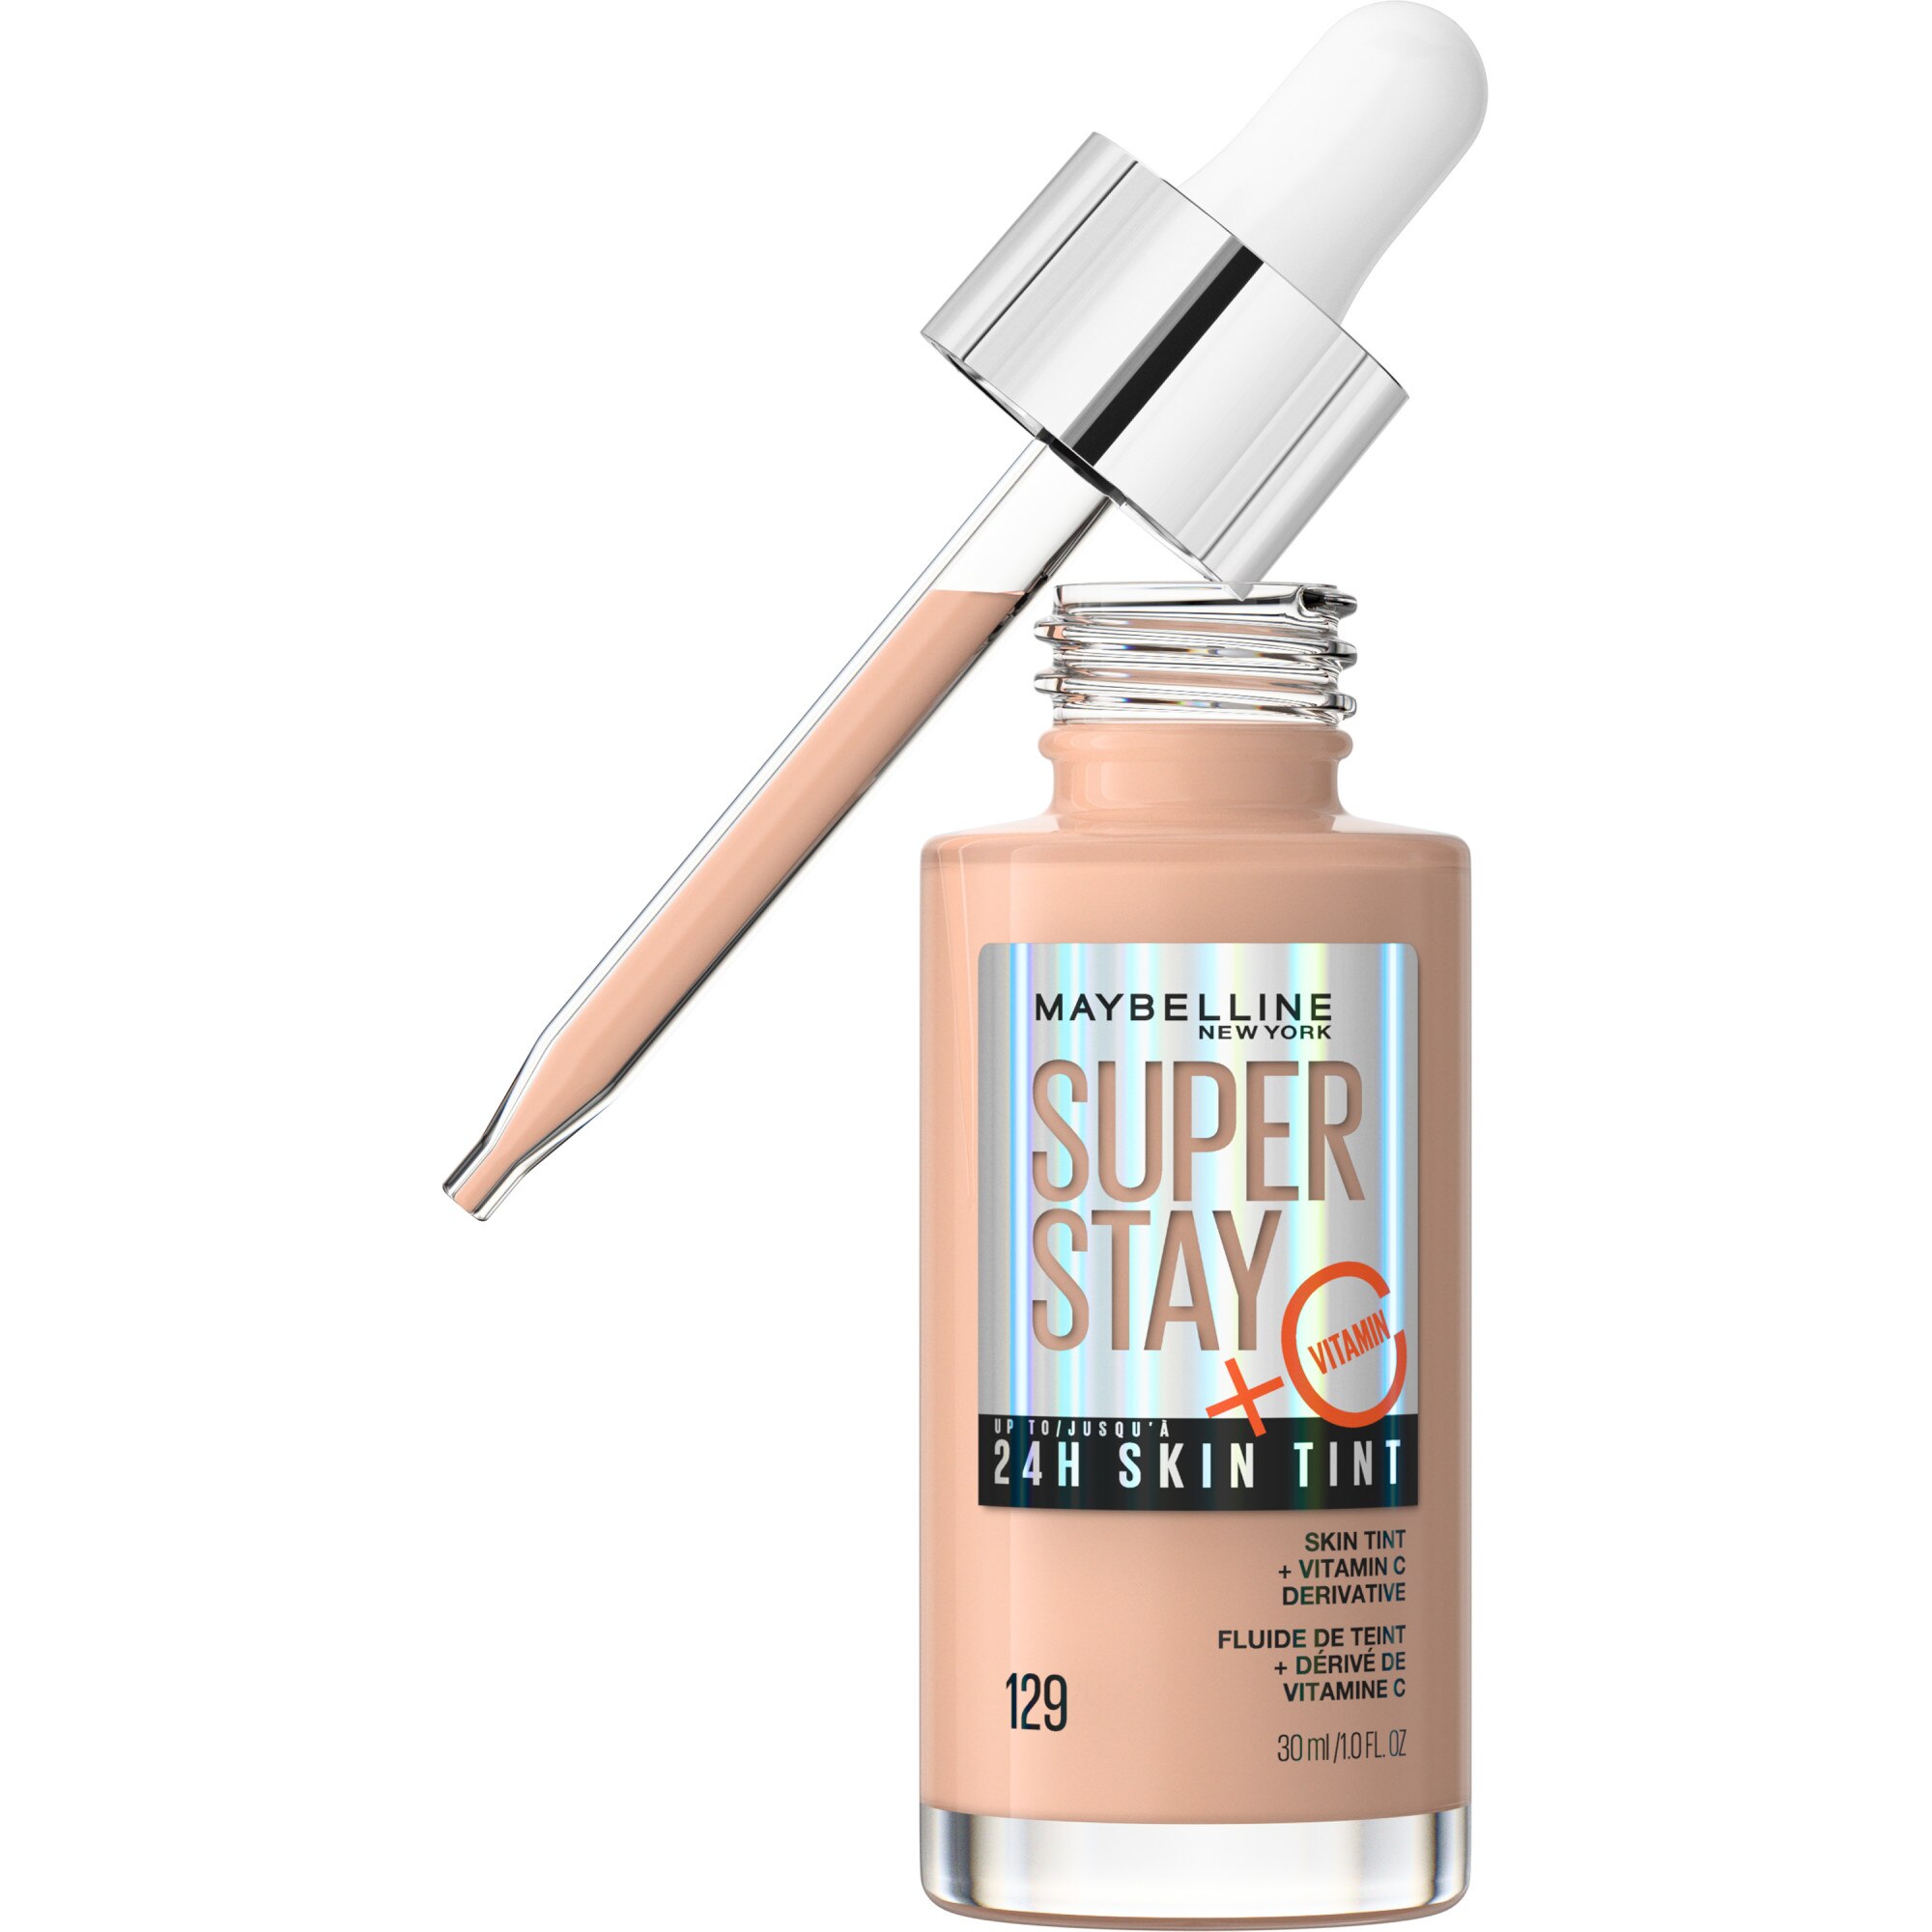 Maybelline New York Super Stay Up To 24HR Skin Tint With Vitamin C, 129, 1 Oz , CVS